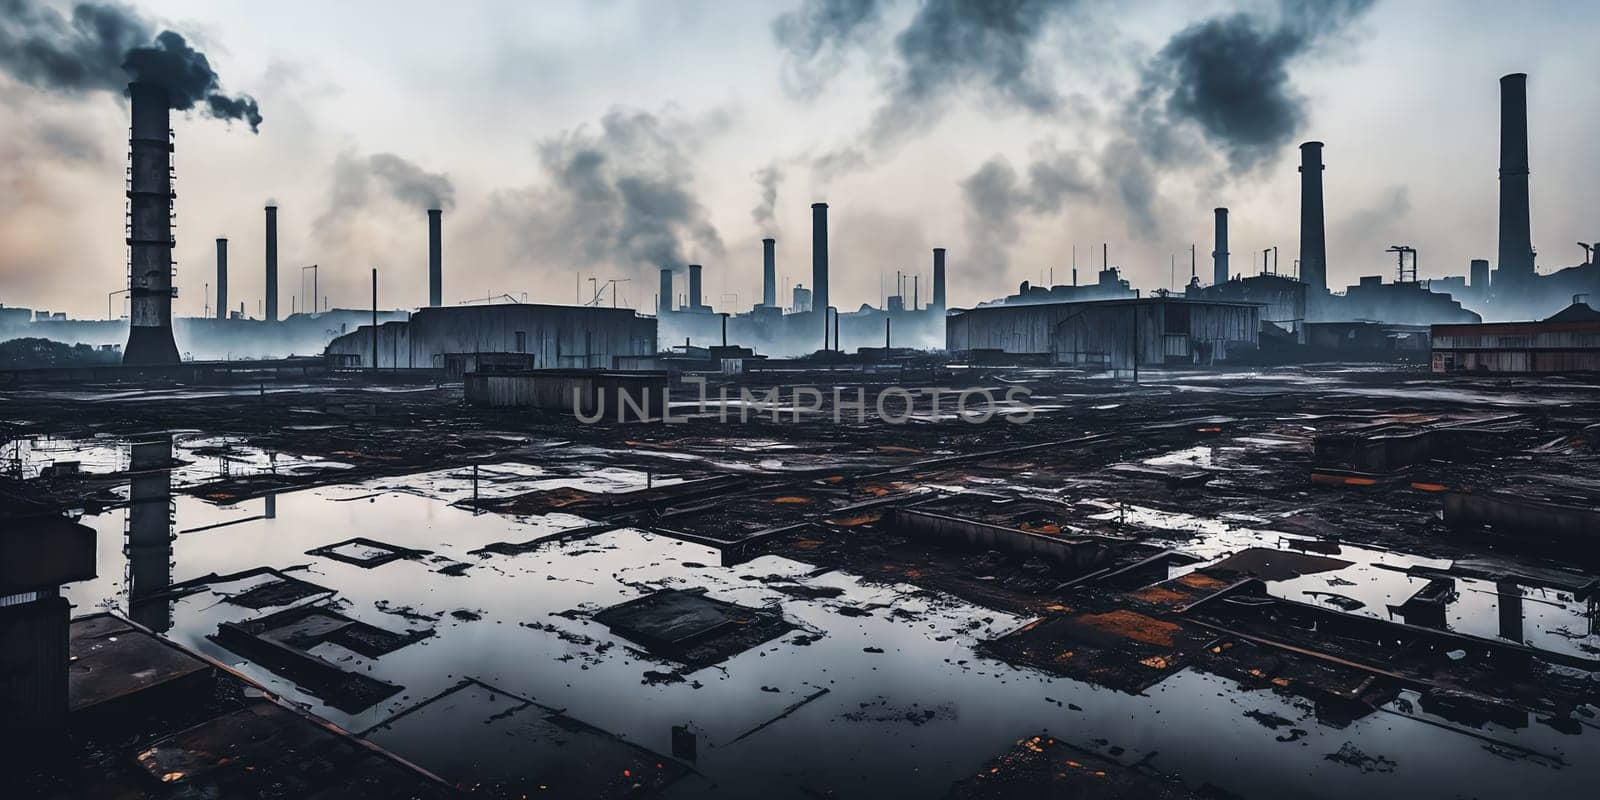 Industrial Decay. Industrial area in decay, with abandoned factories, rusty machinery, and a polluted skyline creating a haunting scene of industrial collapse.